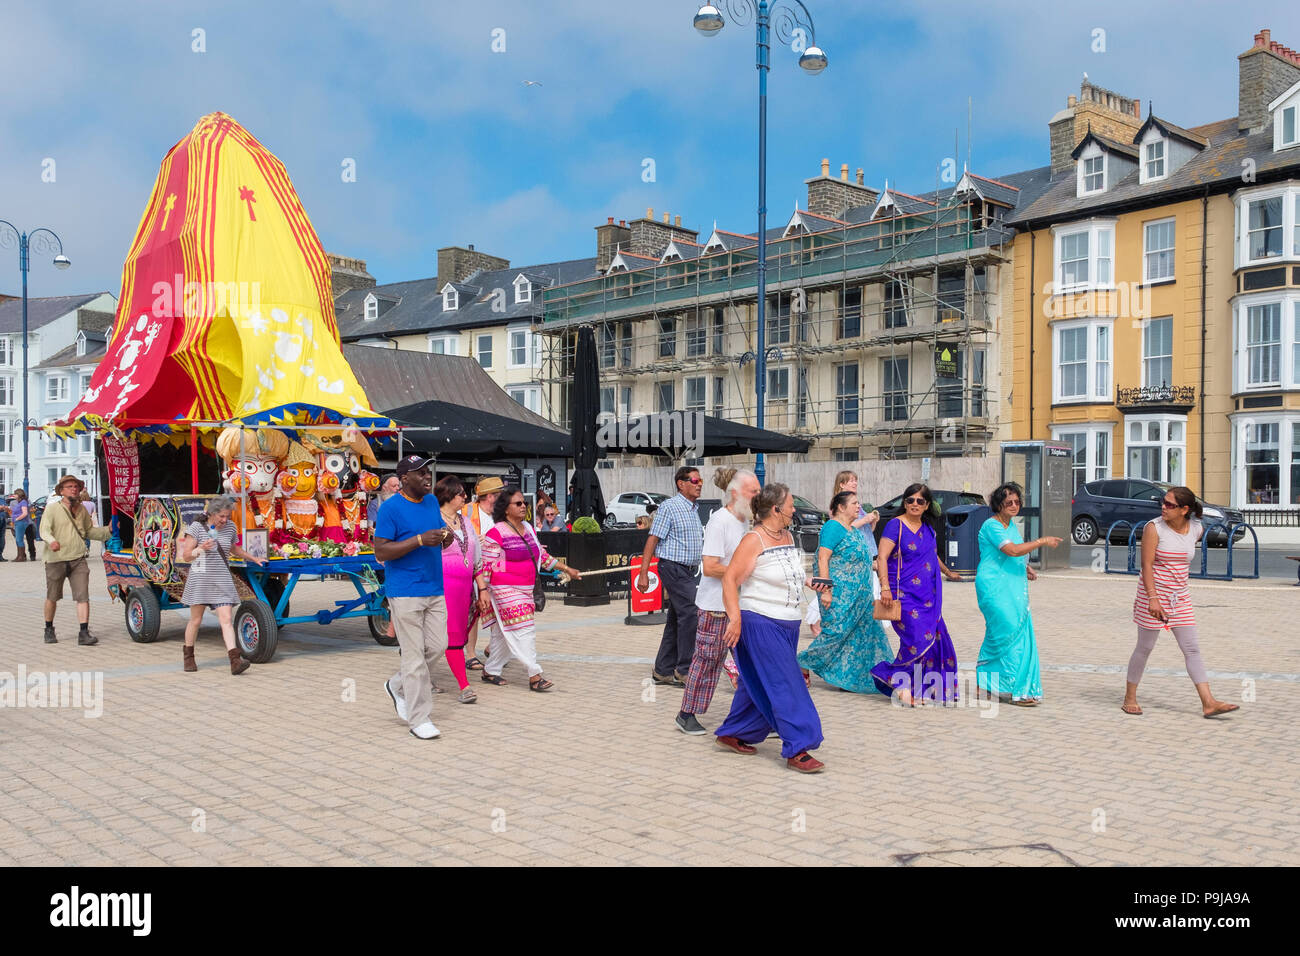 Faith and religion on the UK: A group of Hare Krishna devotees with their 'Ratha' a  colourful votive mobile temple chariot to the deity Lord Jagannath, chanting as they tow it along the promenade at Aberystwyth, Wales UK, on a summer afternoon Stock Photo